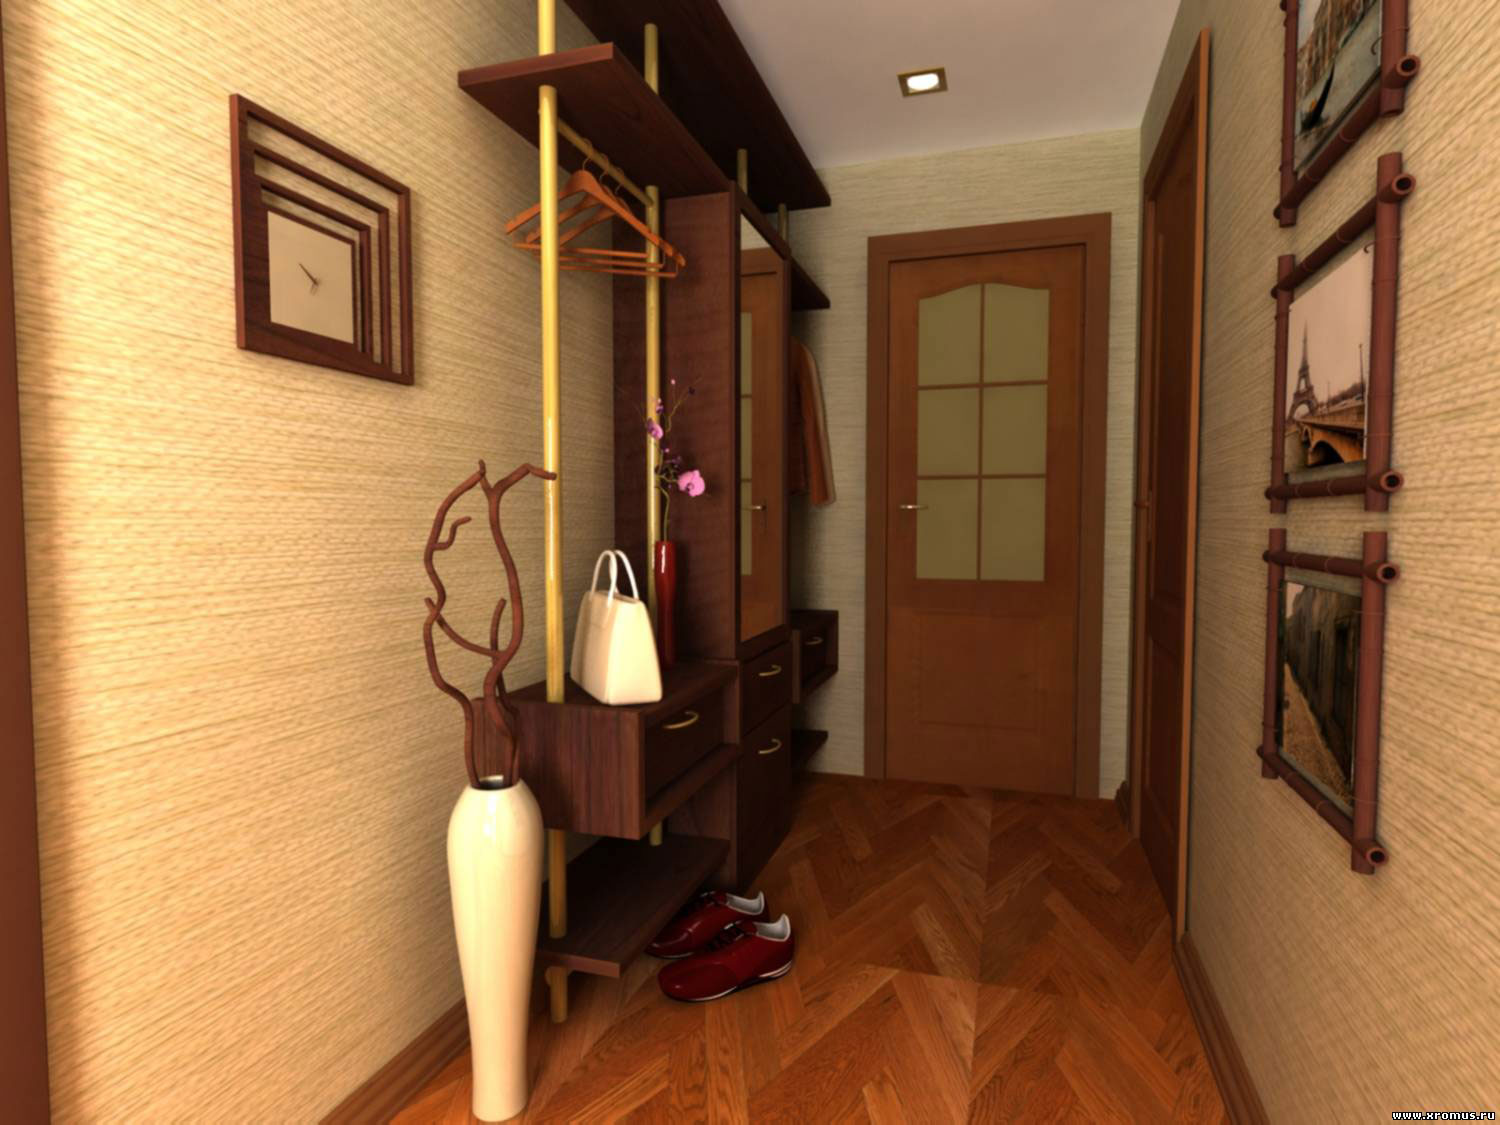 Wallpaper design ideas for a strictly and classic style hallway in the apartment